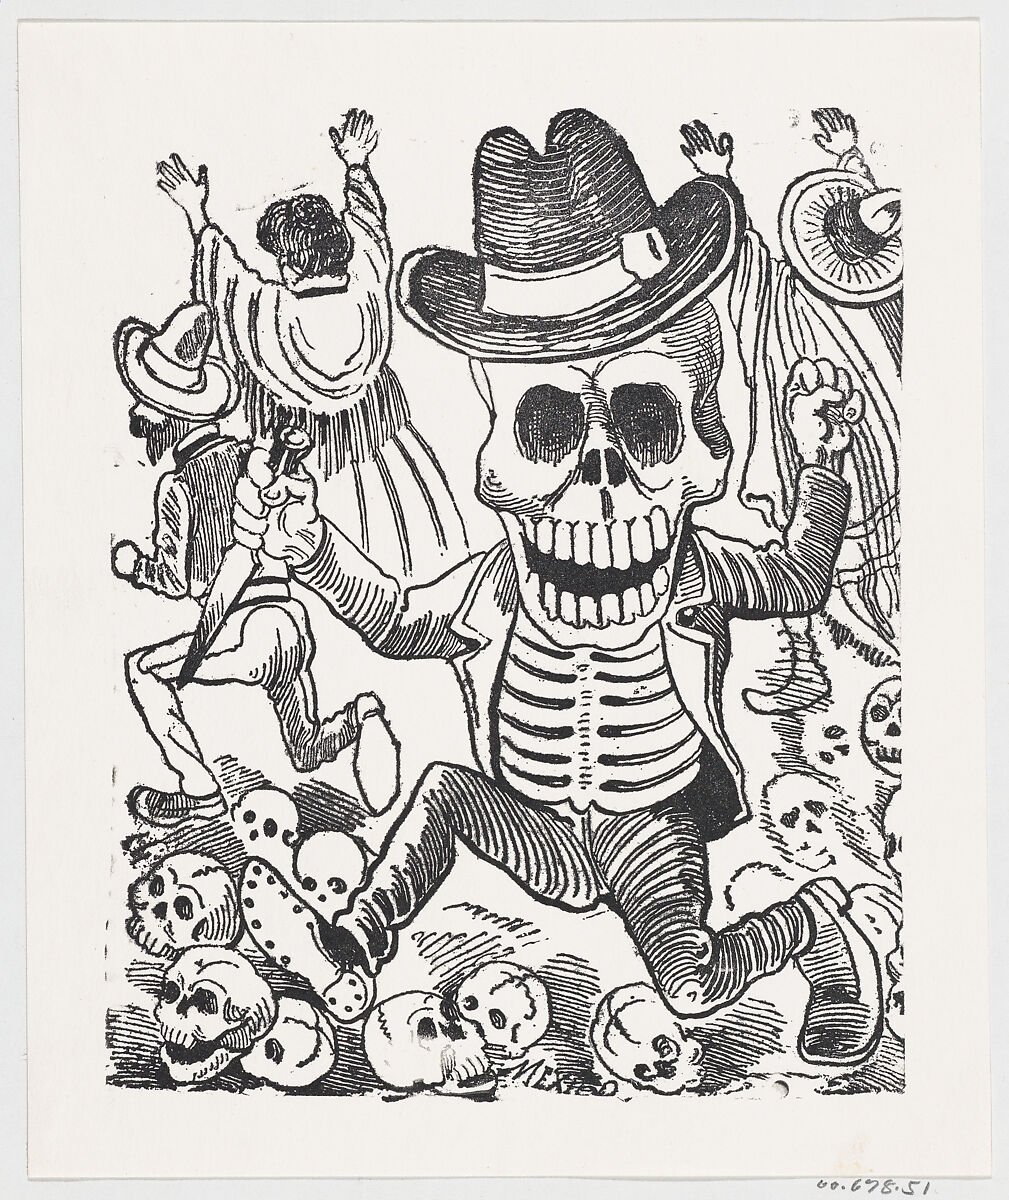 A skeleton holding a knife leaping over a pile of skulls, people flee in the background, from a broadside entitled 'Las bravisimas calaveras Guatemaltecas', José Guadalupe Posada (Mexican, Aguascalientes 1852–1913 Mexico City), Zincograph 